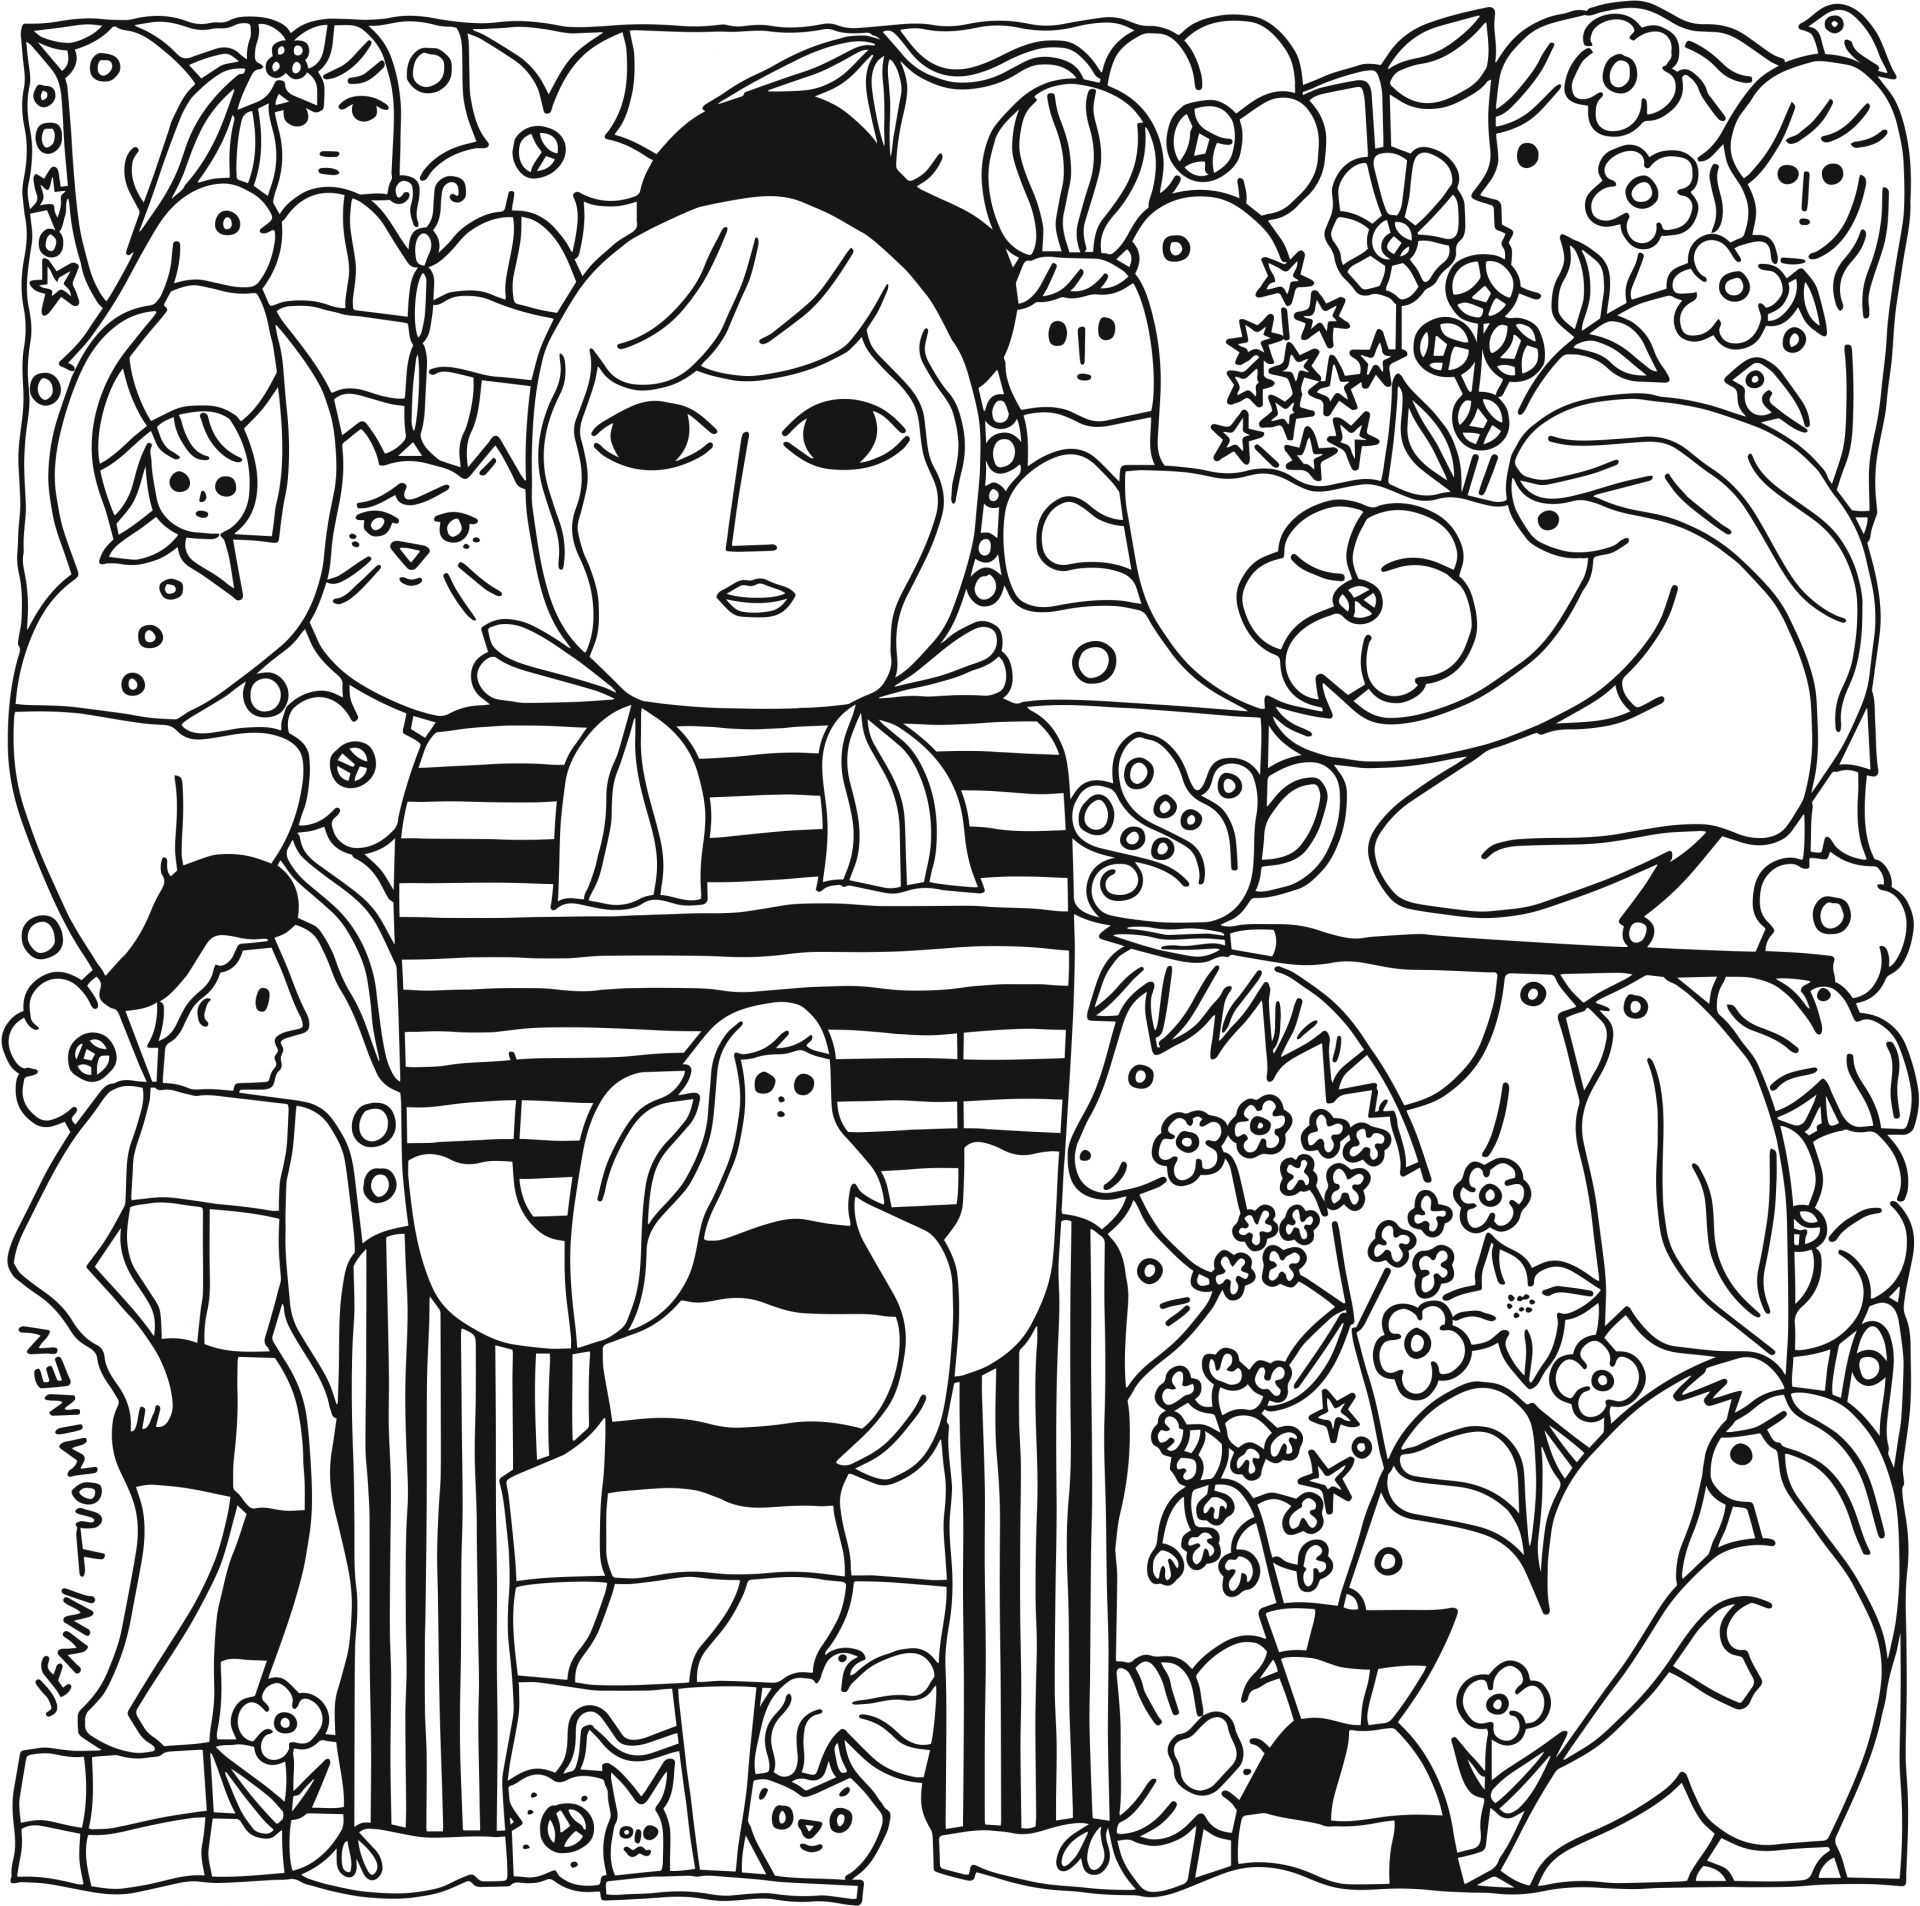 Black and white illustration with human and animal figures. By Jenni Tuominen, Konstrundan 2022